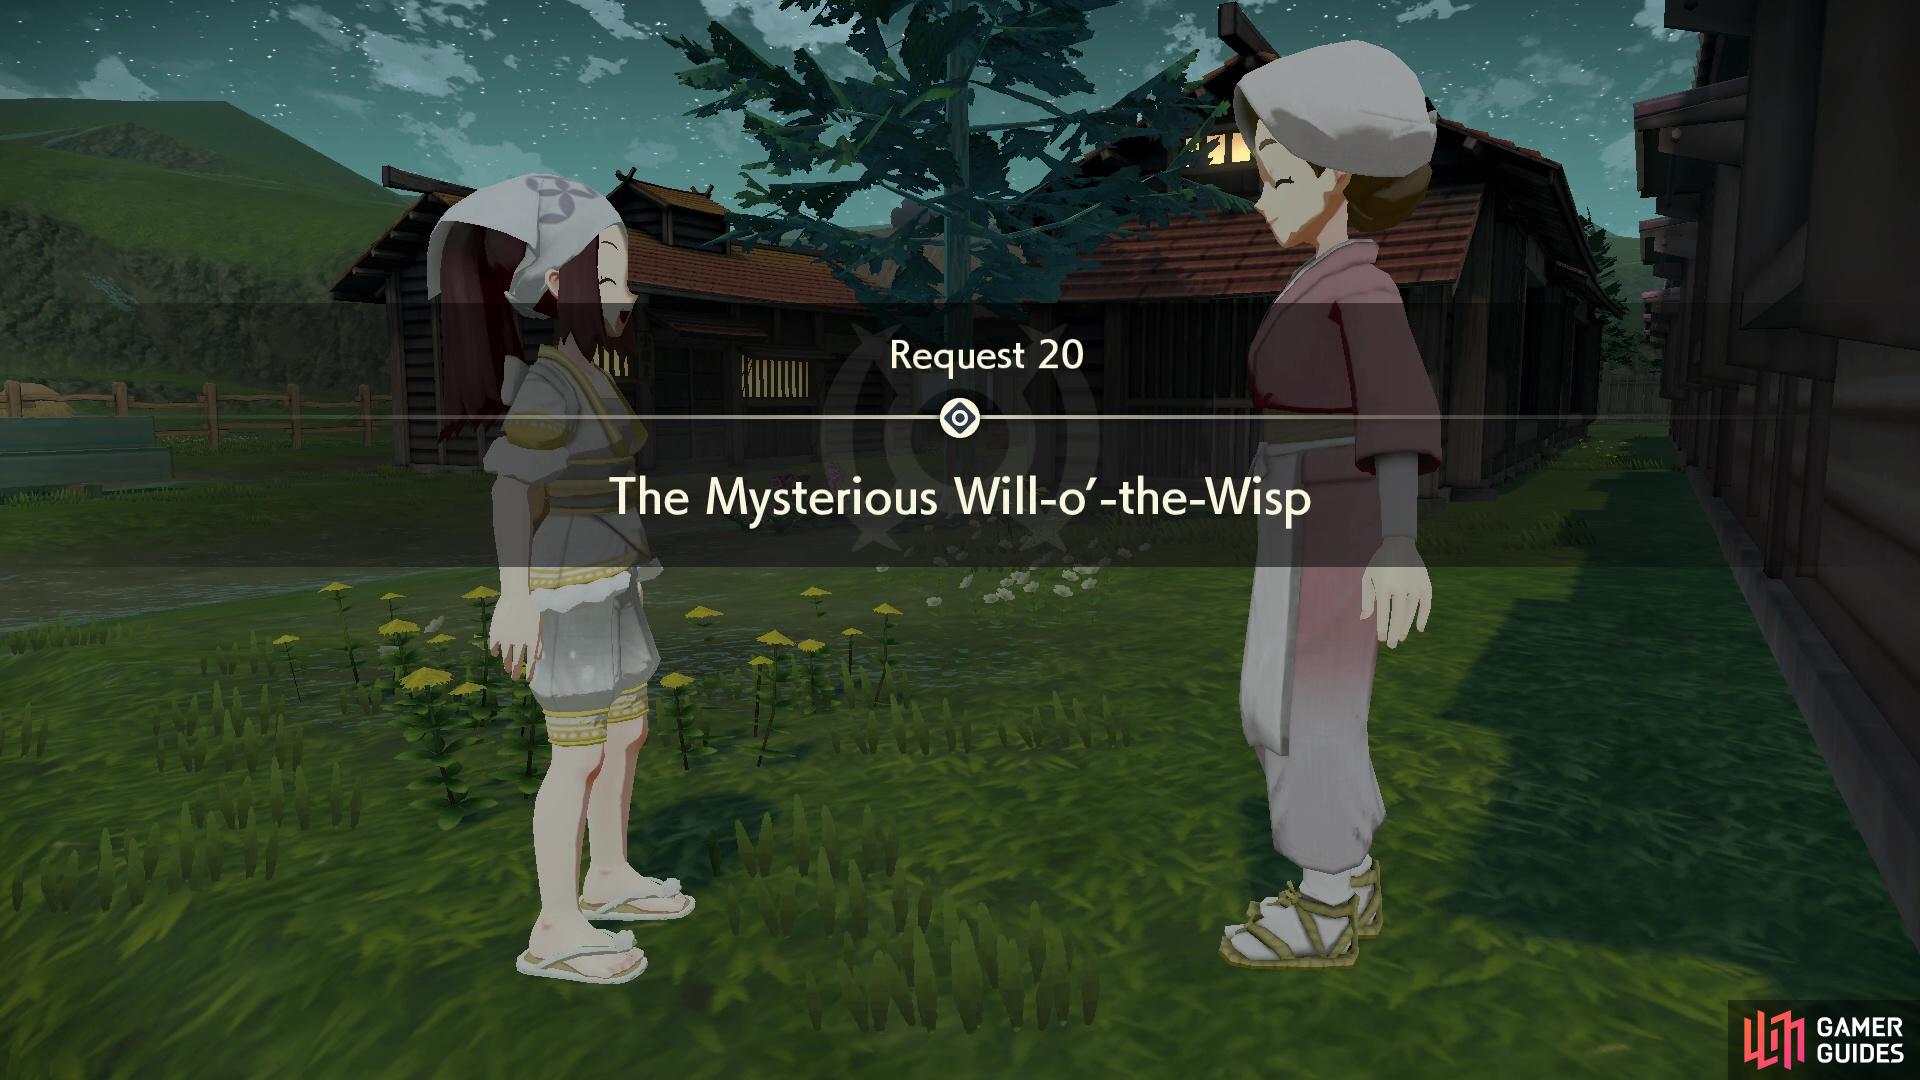 Request 20: The Mysterious Will-o’-the-Wisp.